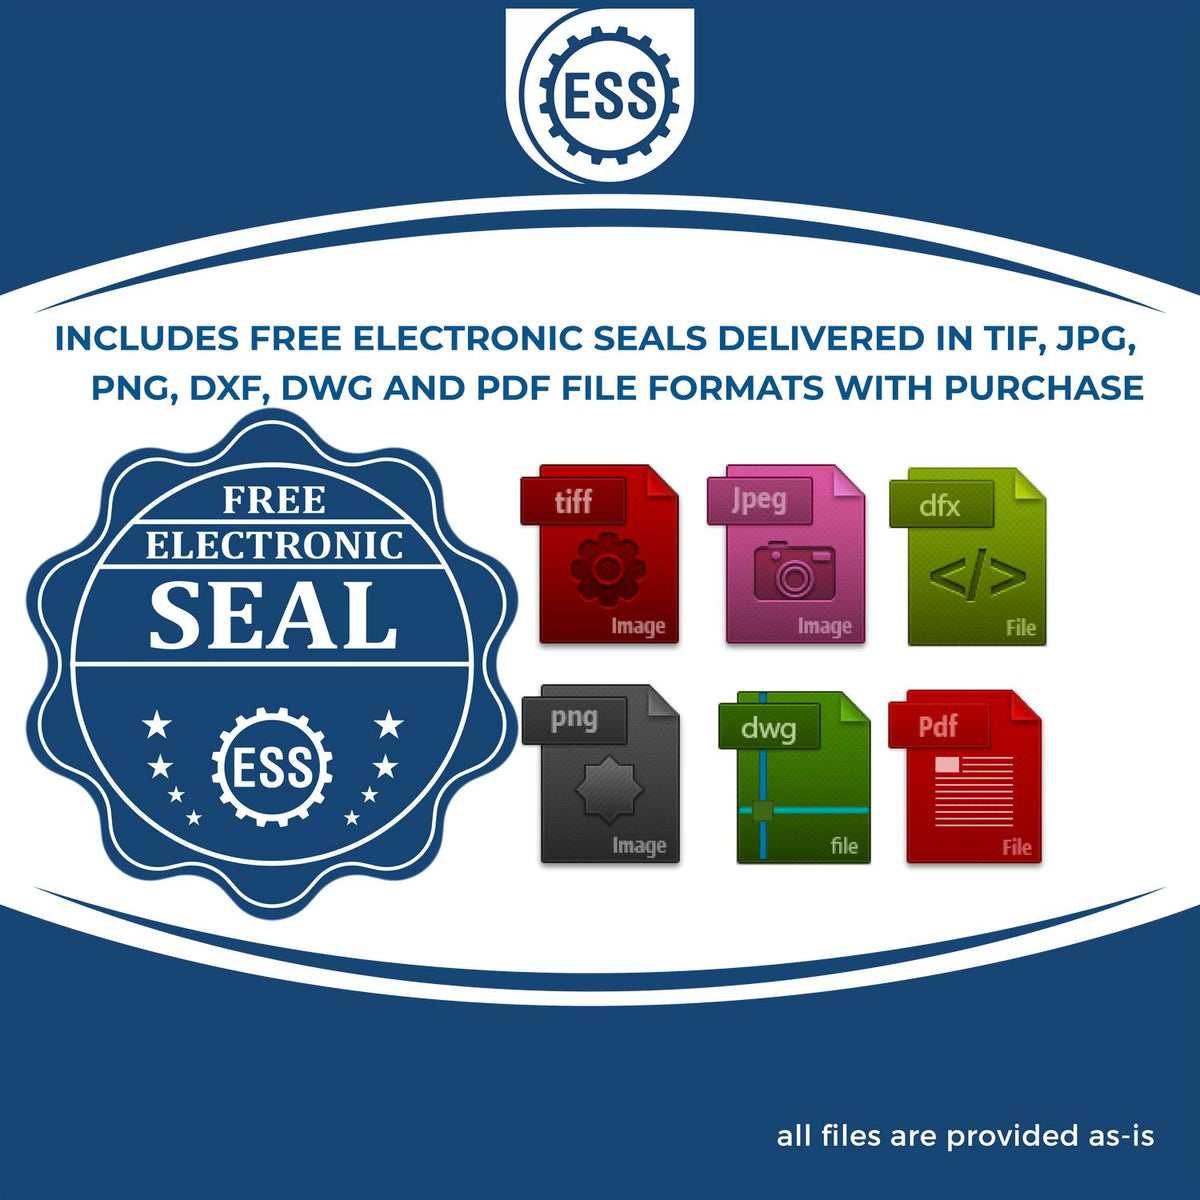 An infographic for the free electronic seal for the Soft California Professional Engineer Seal illustrating the different file type icons such as DXF, DWG, TIF, JPG and PNG.